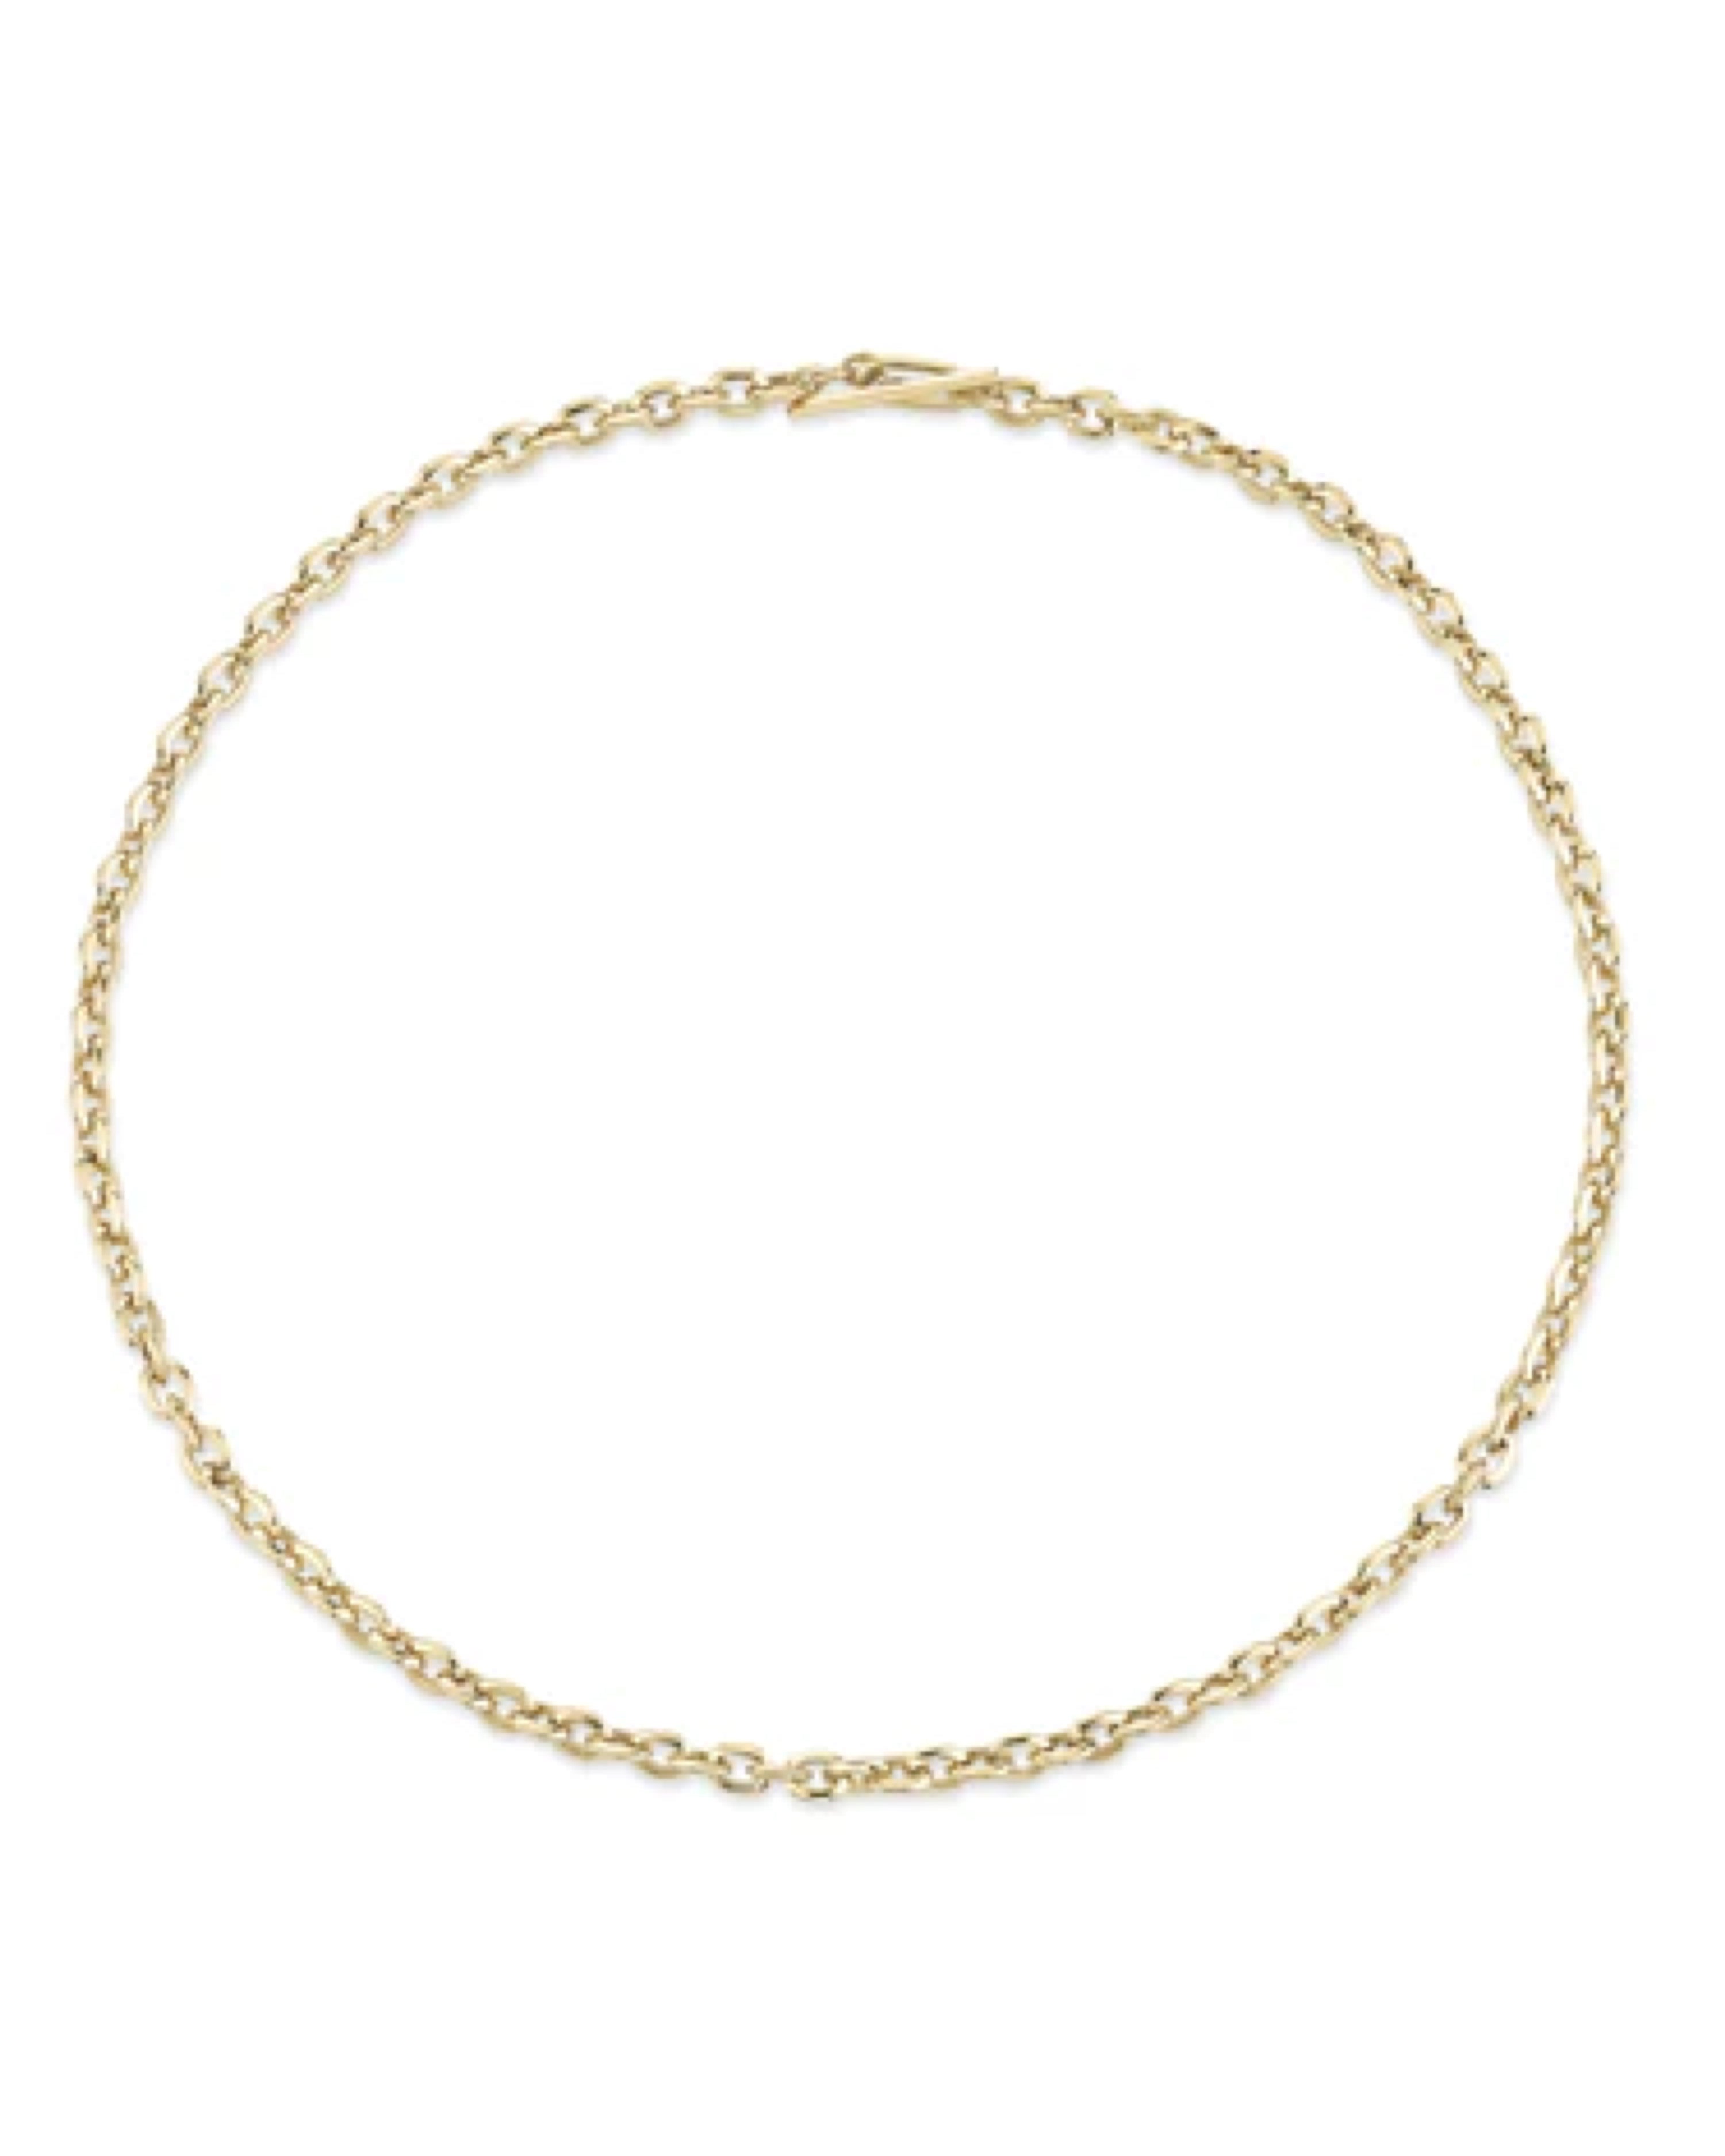 XS KNIFE EDGE LINK NECKLACE - YELLOW GOLD